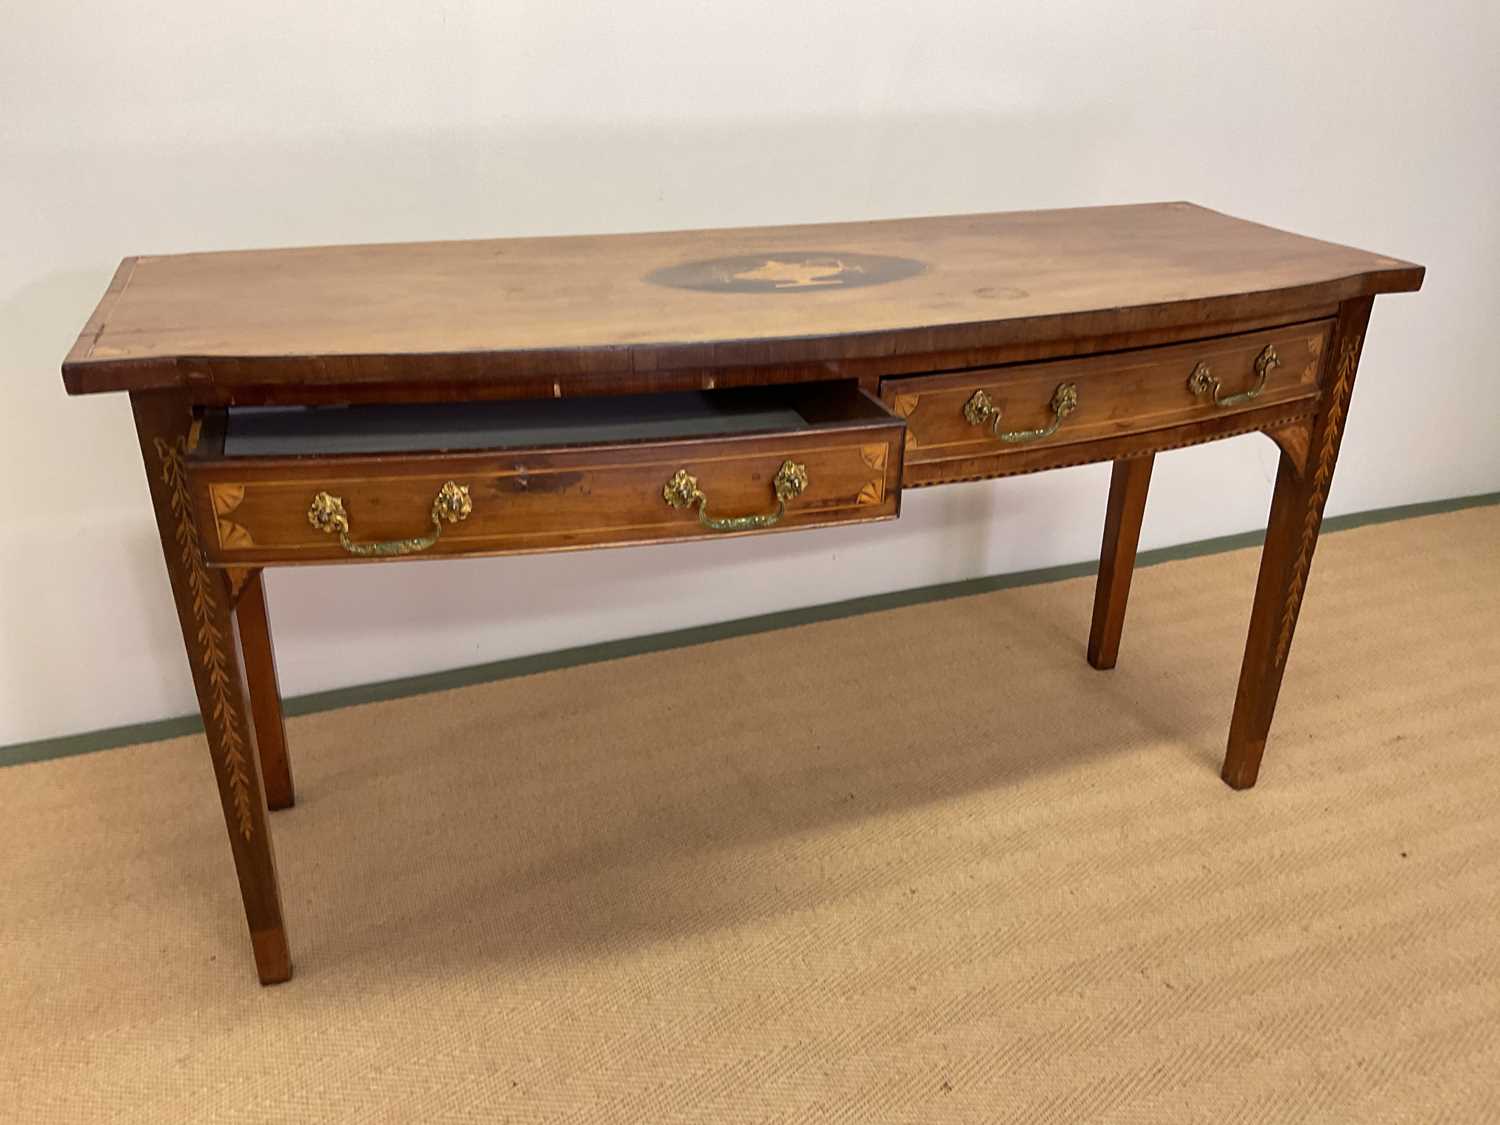 An early 19th century mahogany and inlaid bowfronted serving table with two frieze drawers raised on - Image 3 of 6